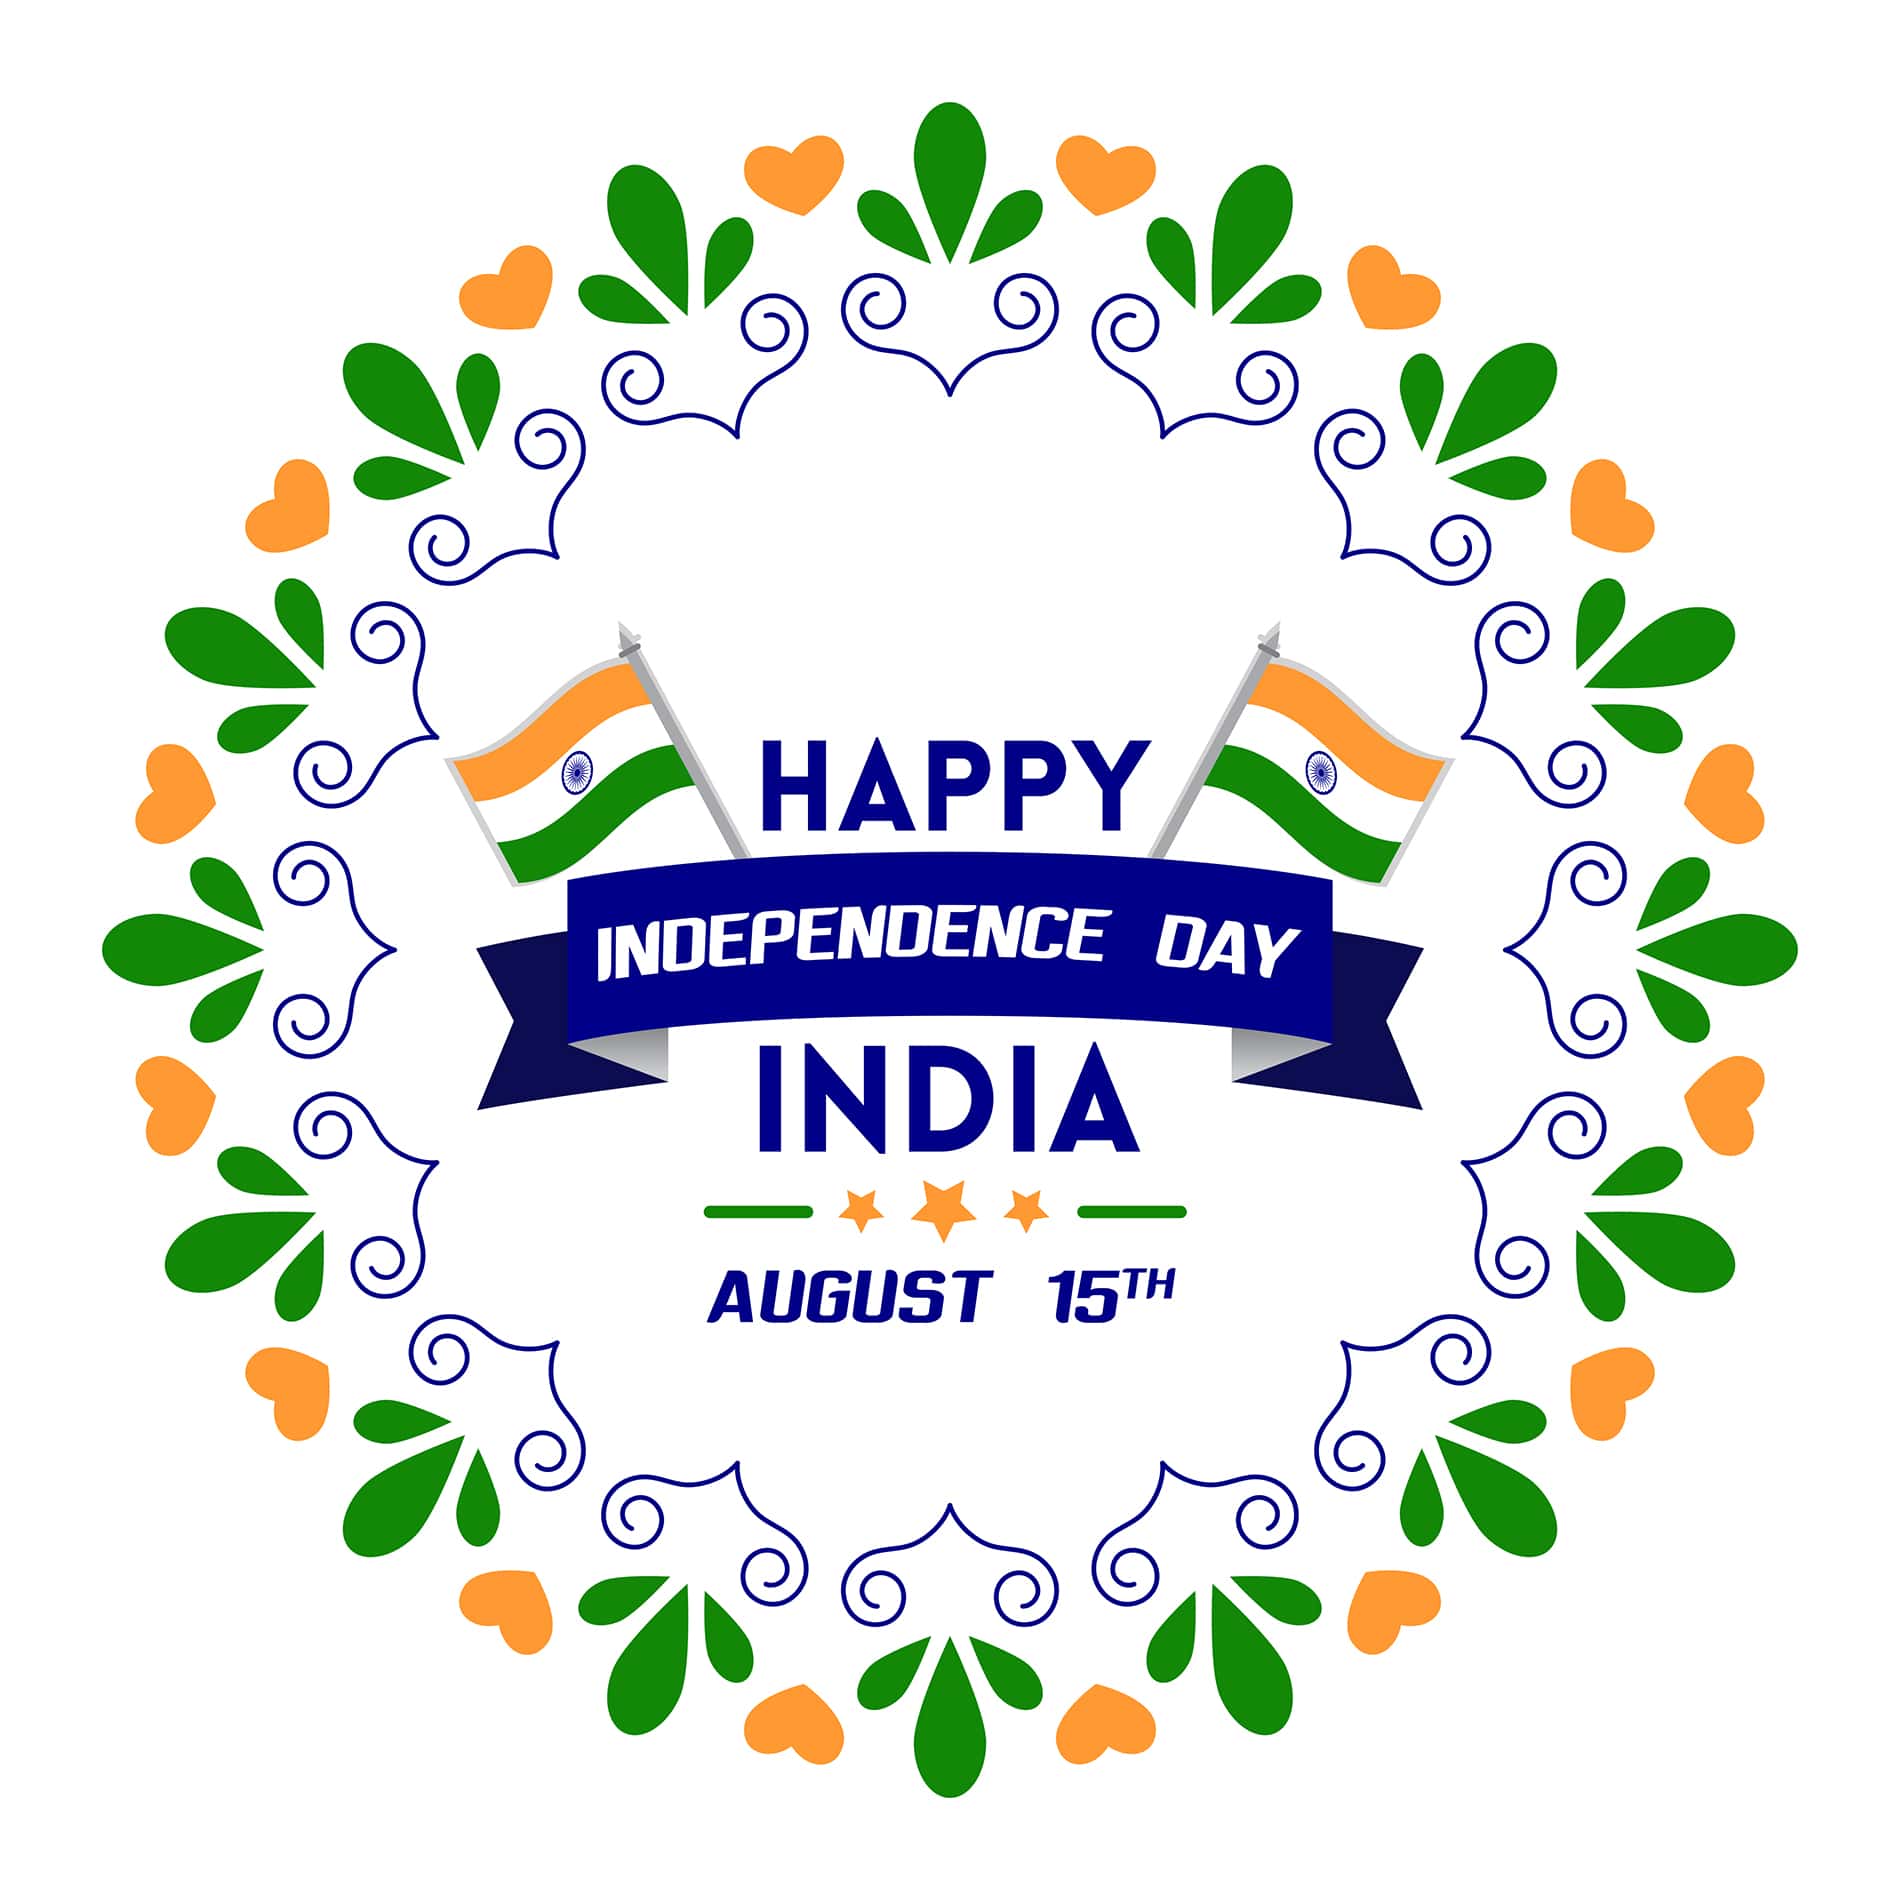 Decorative Indian independence day vector graphics in tri color for free download